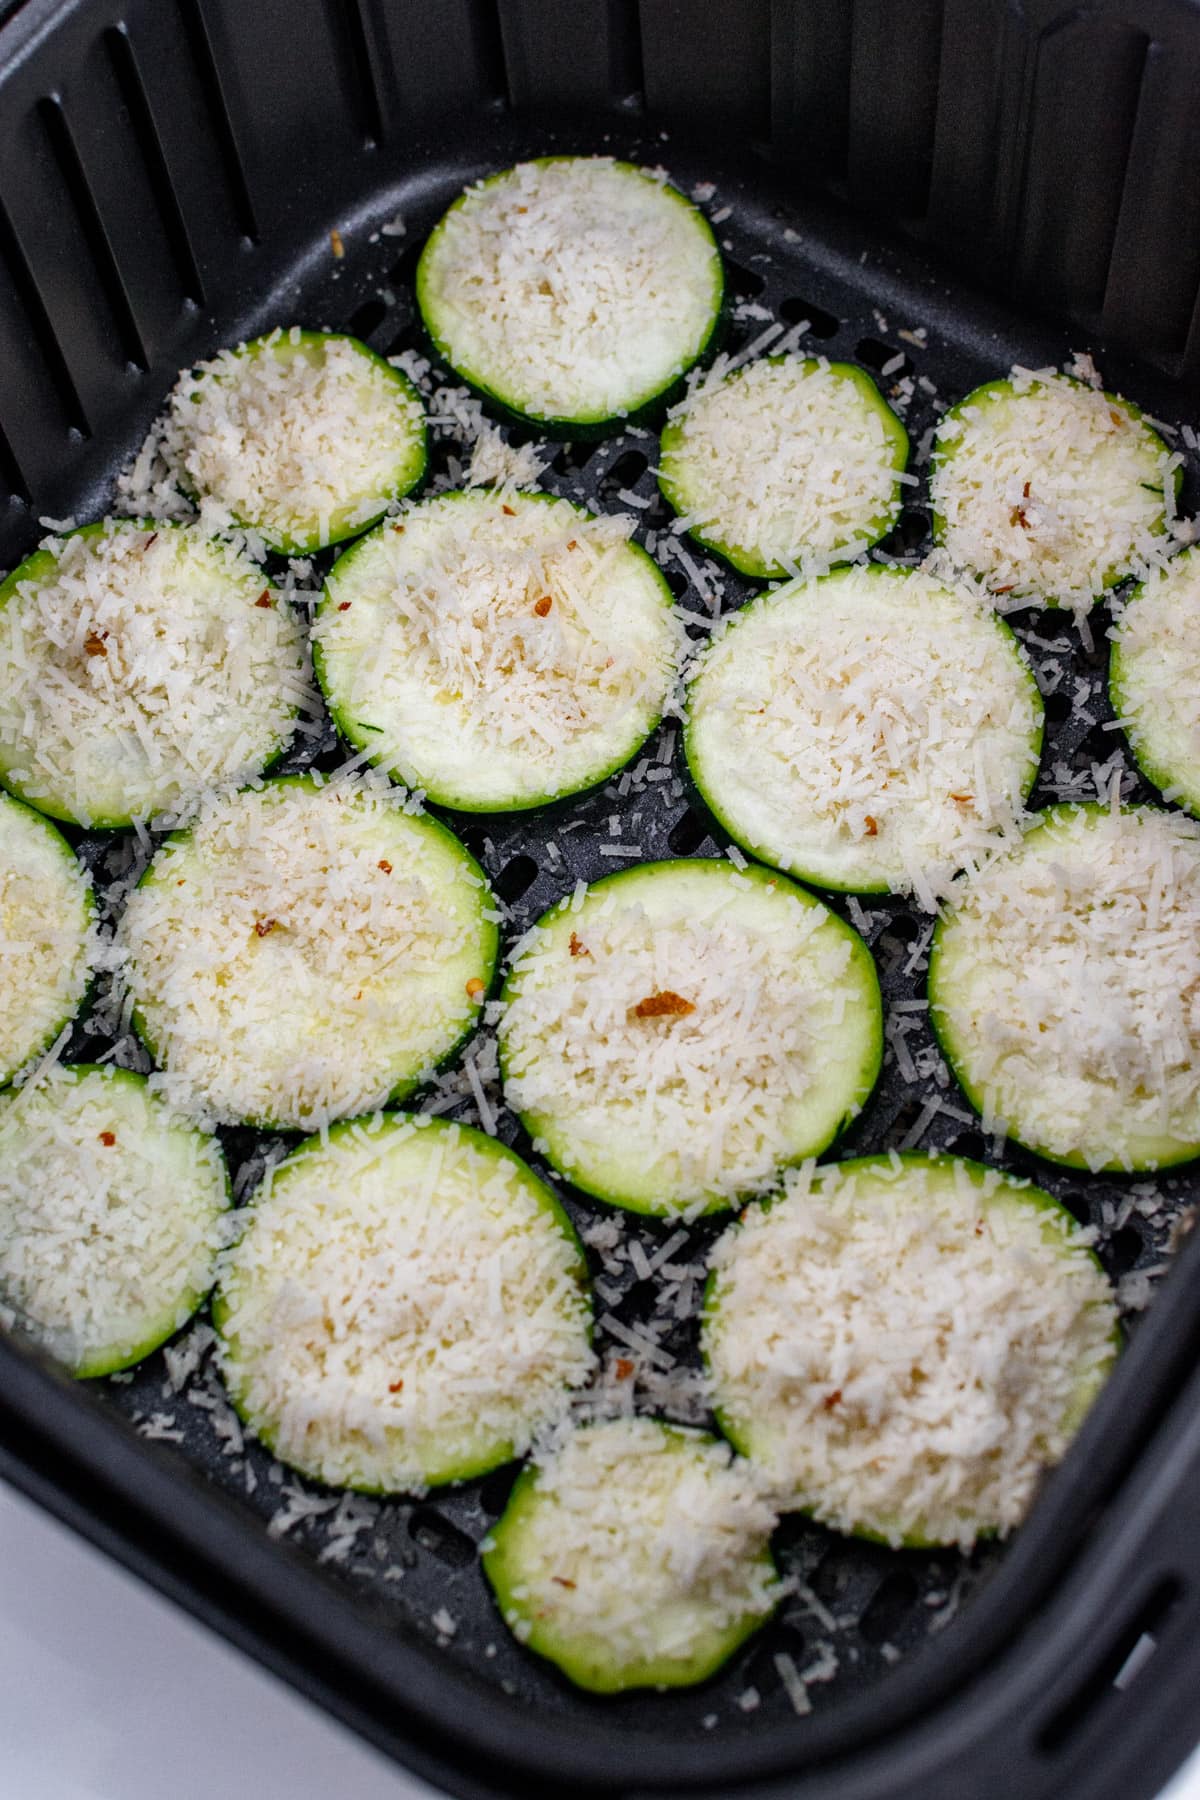 Zucchini slices of grated parmesan and chili flakes in an air fryer basket.